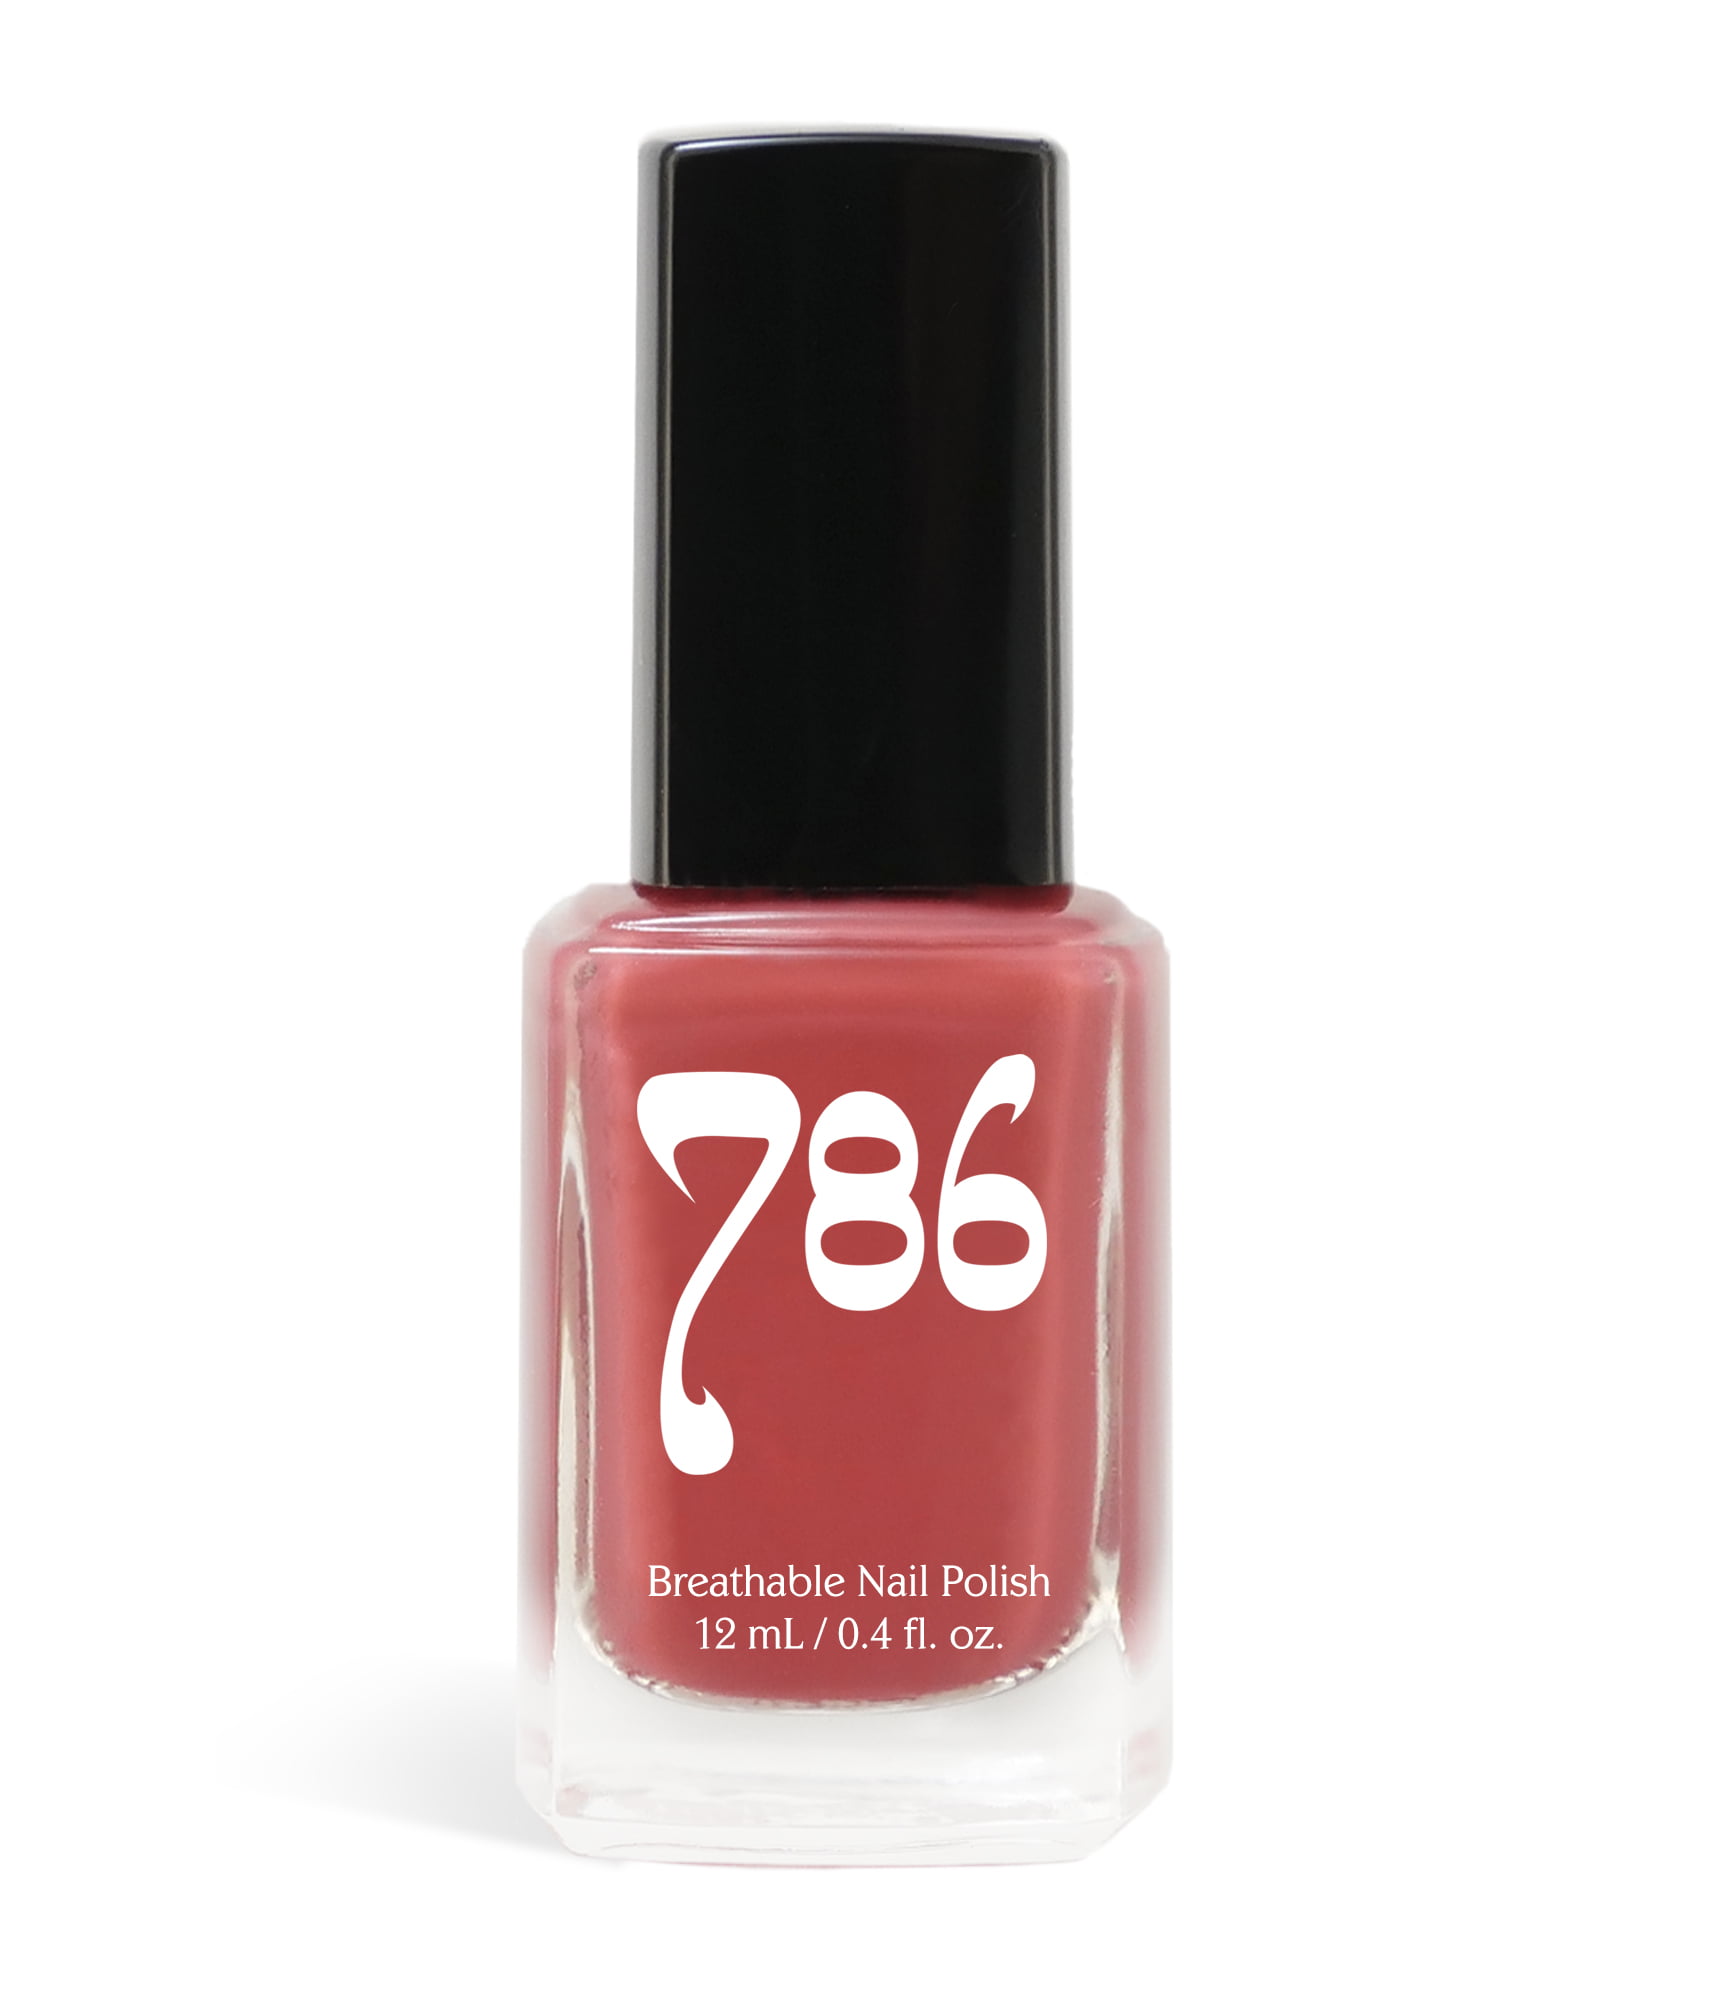 786 Agra Breathable Nail Polish | CoolSprings Galleria